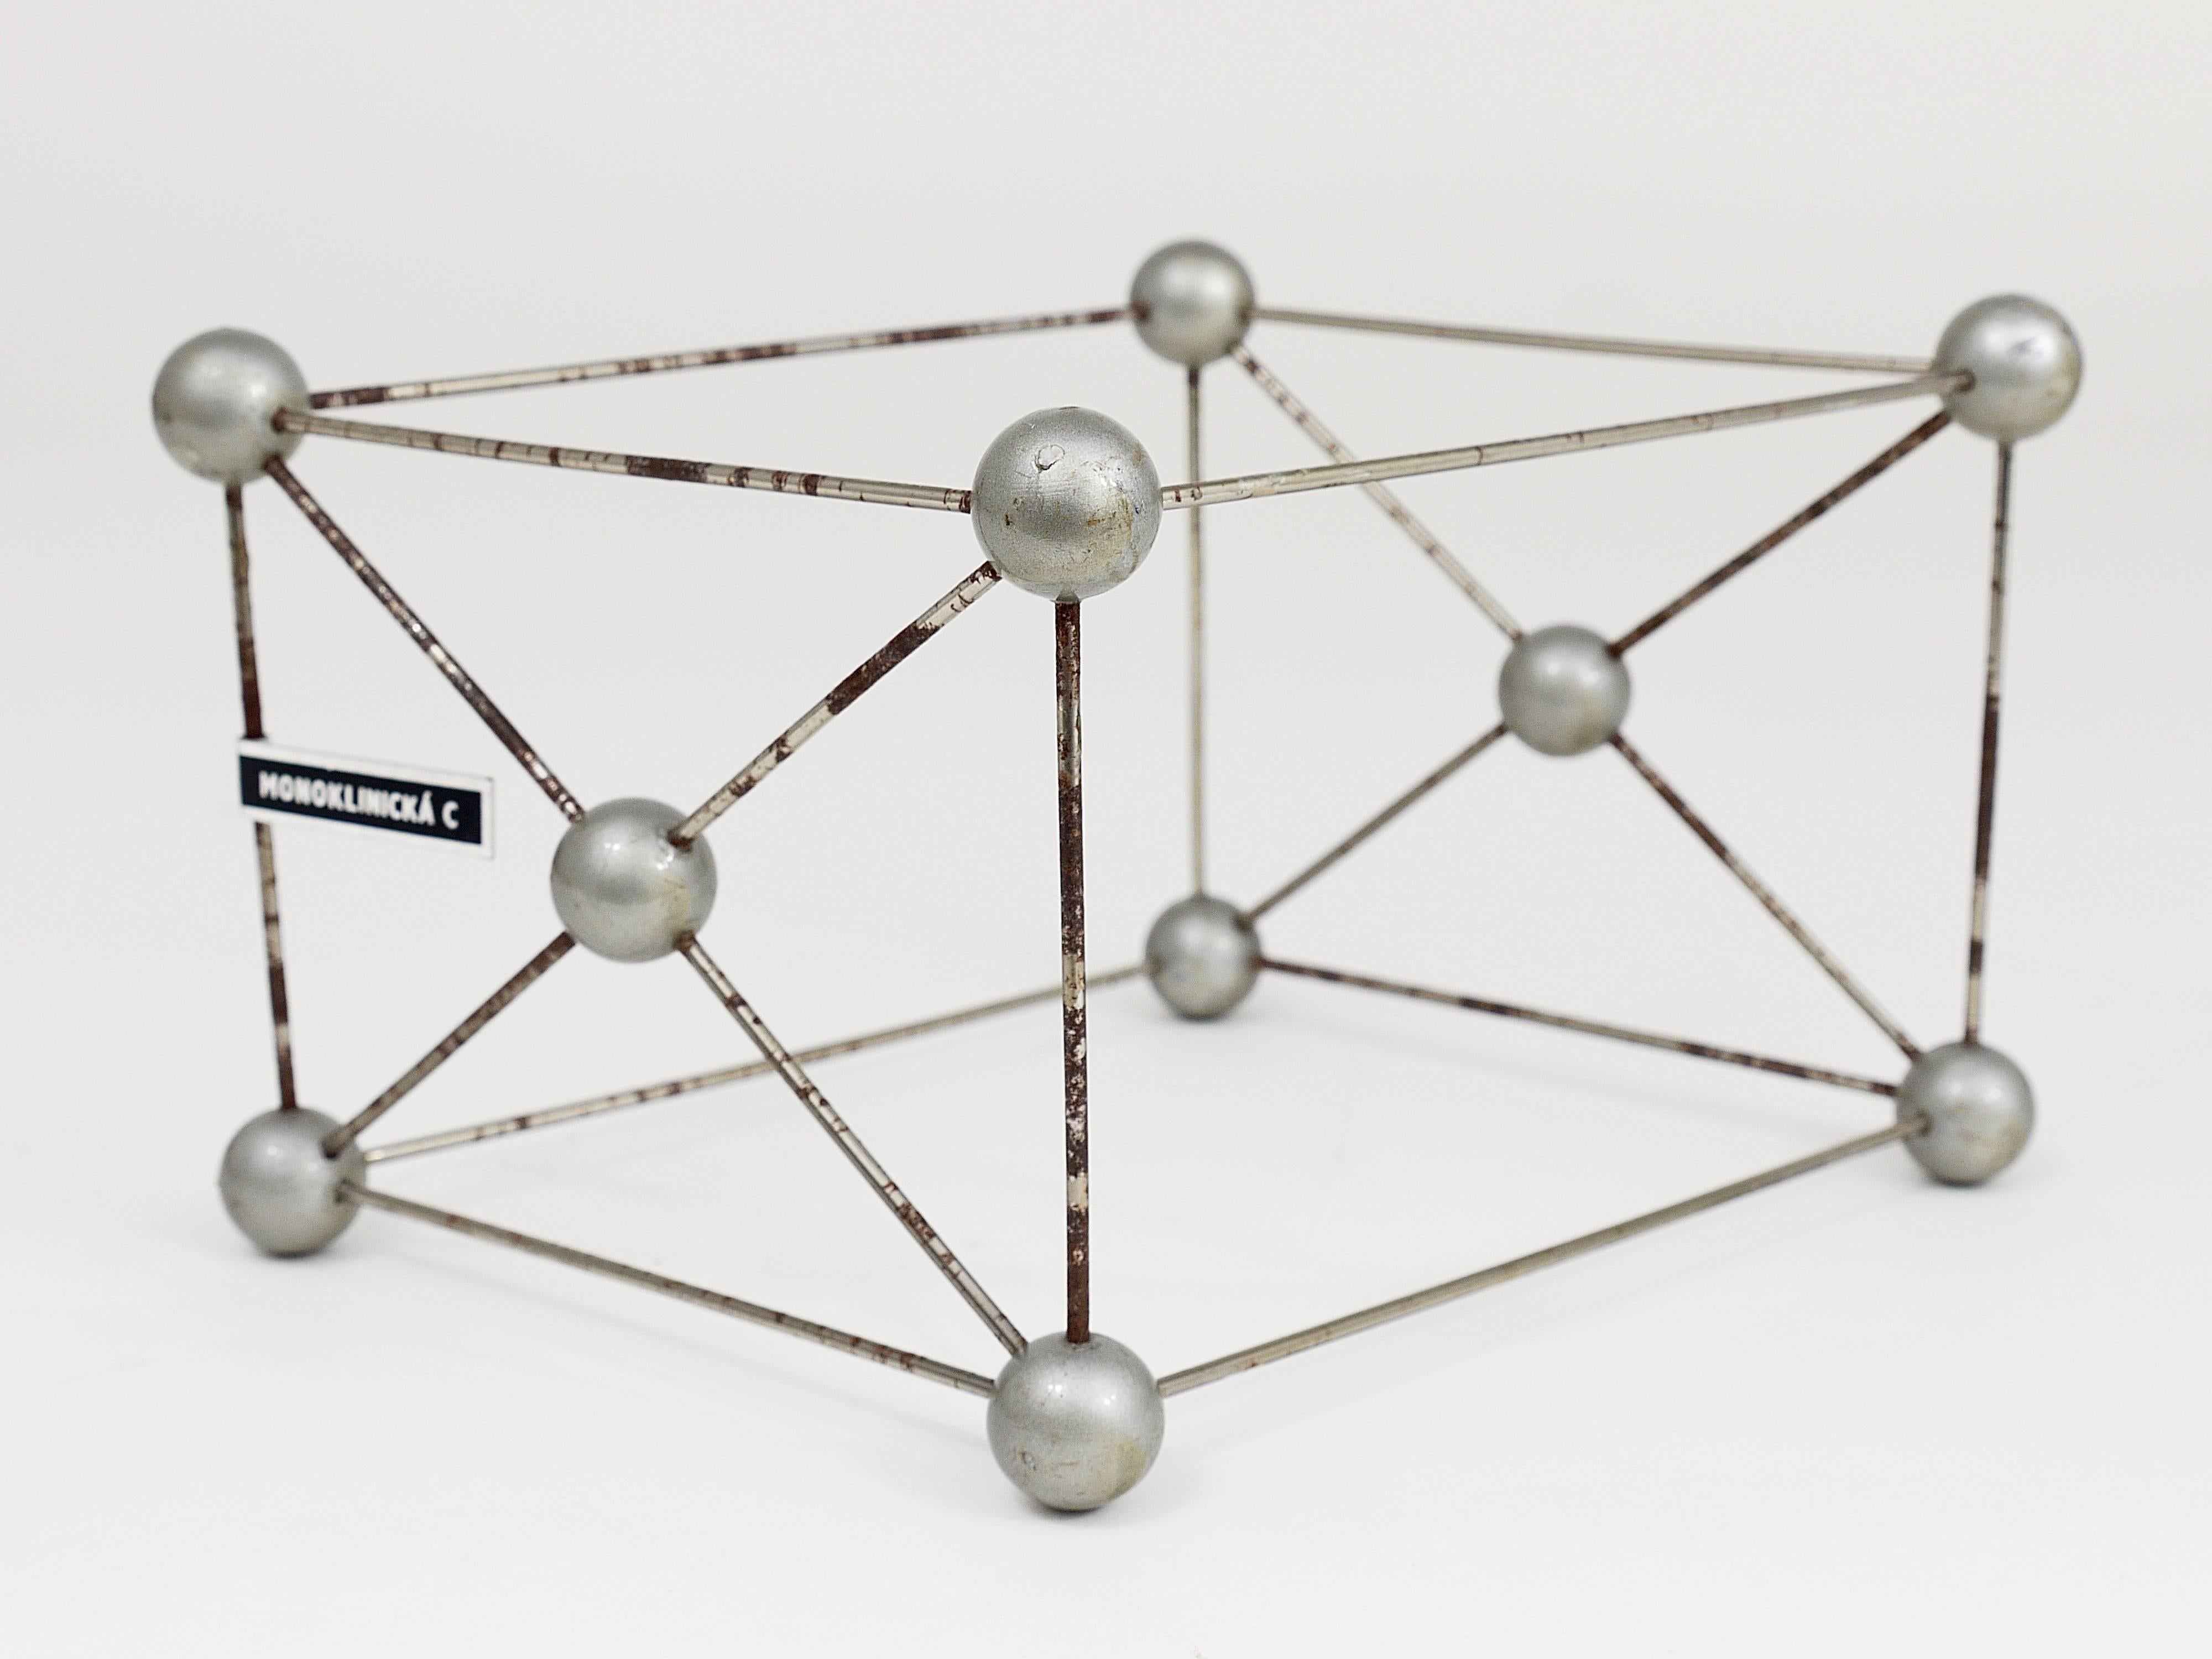 Slovak Set of Seven Different Scientific Crystal Molecular Models from the 1950s